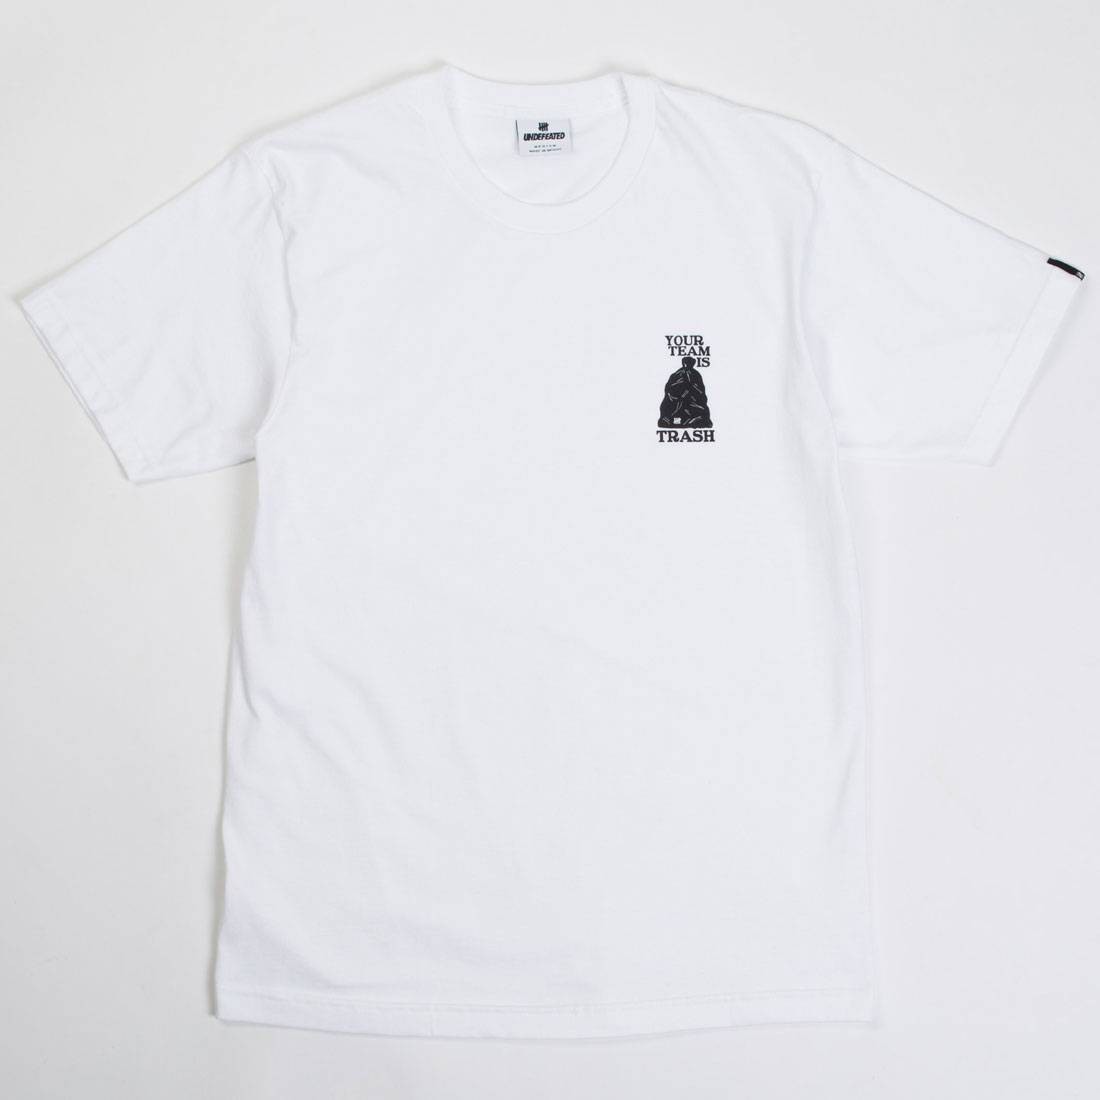 Undefeated Men Team Is Trash Tee (white)